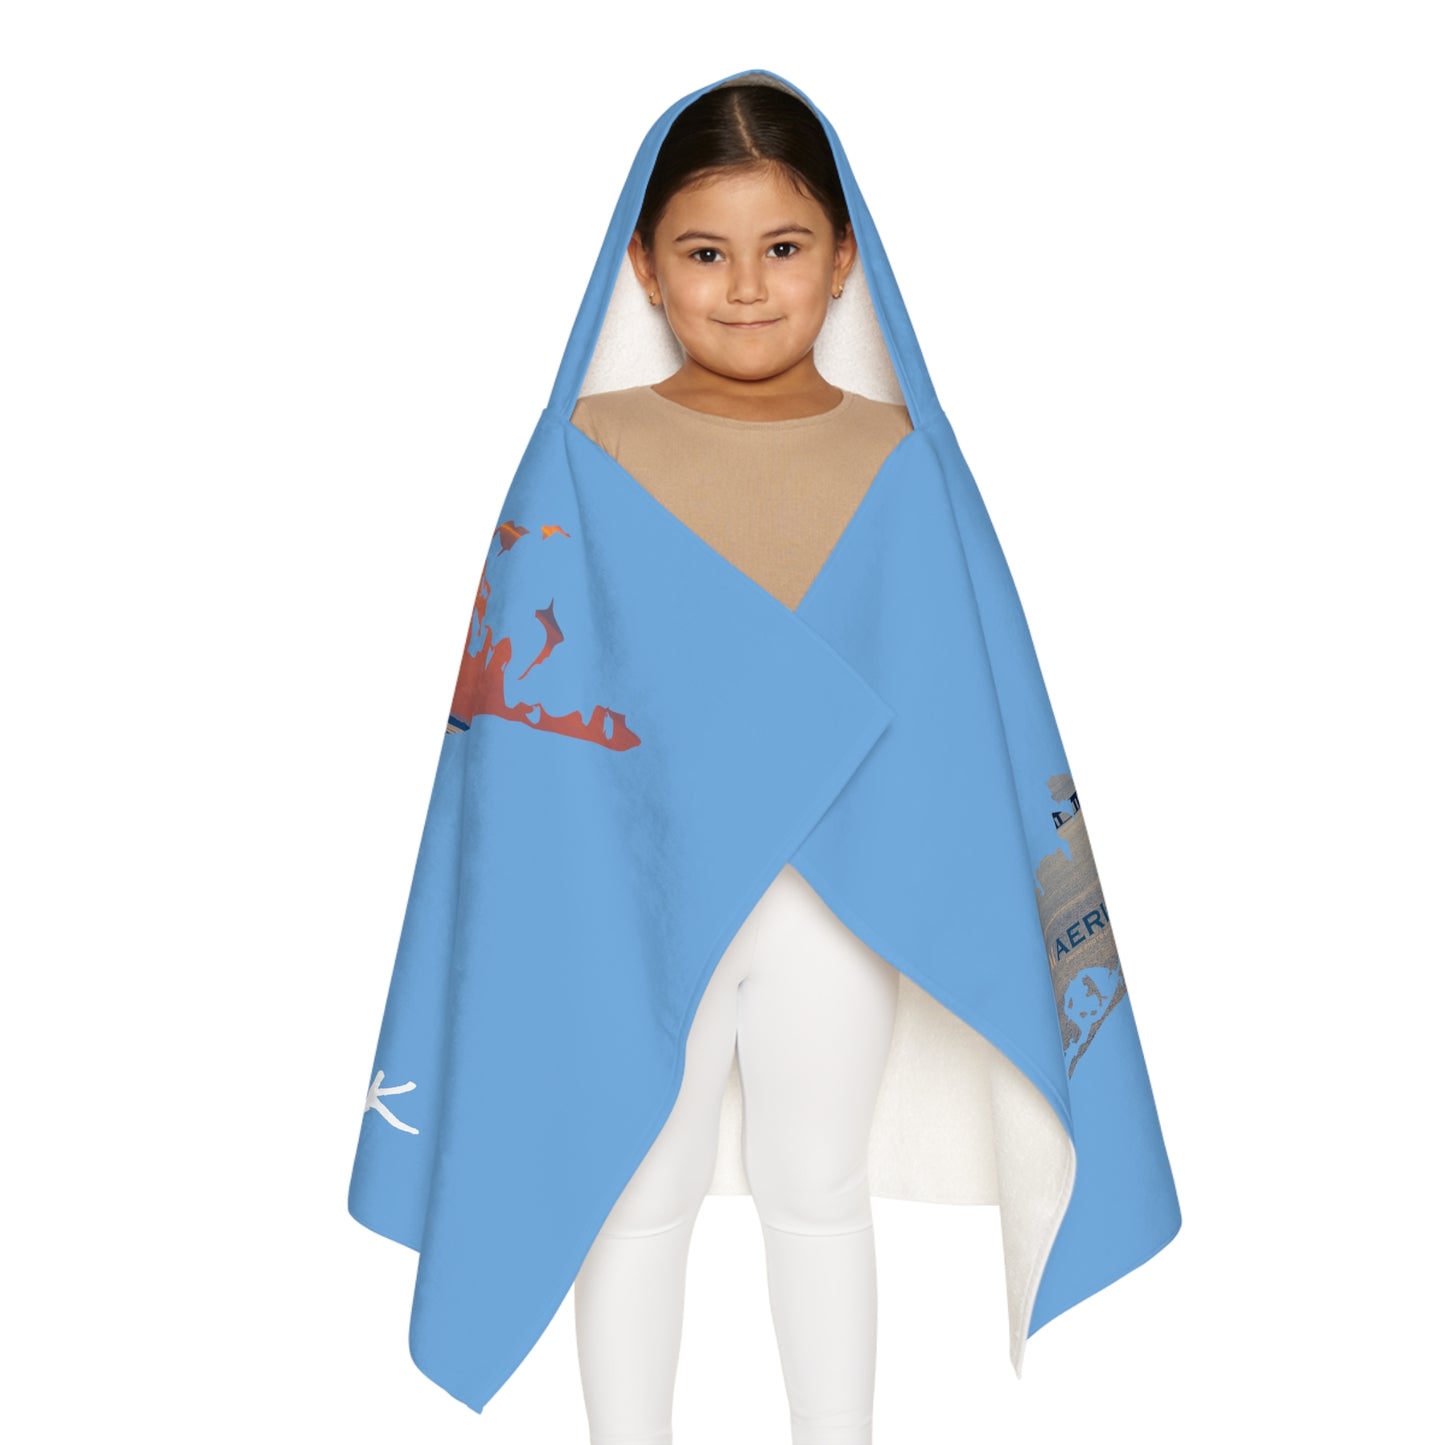 Youth Hooded Towel Blue - Great South Bay Bridge